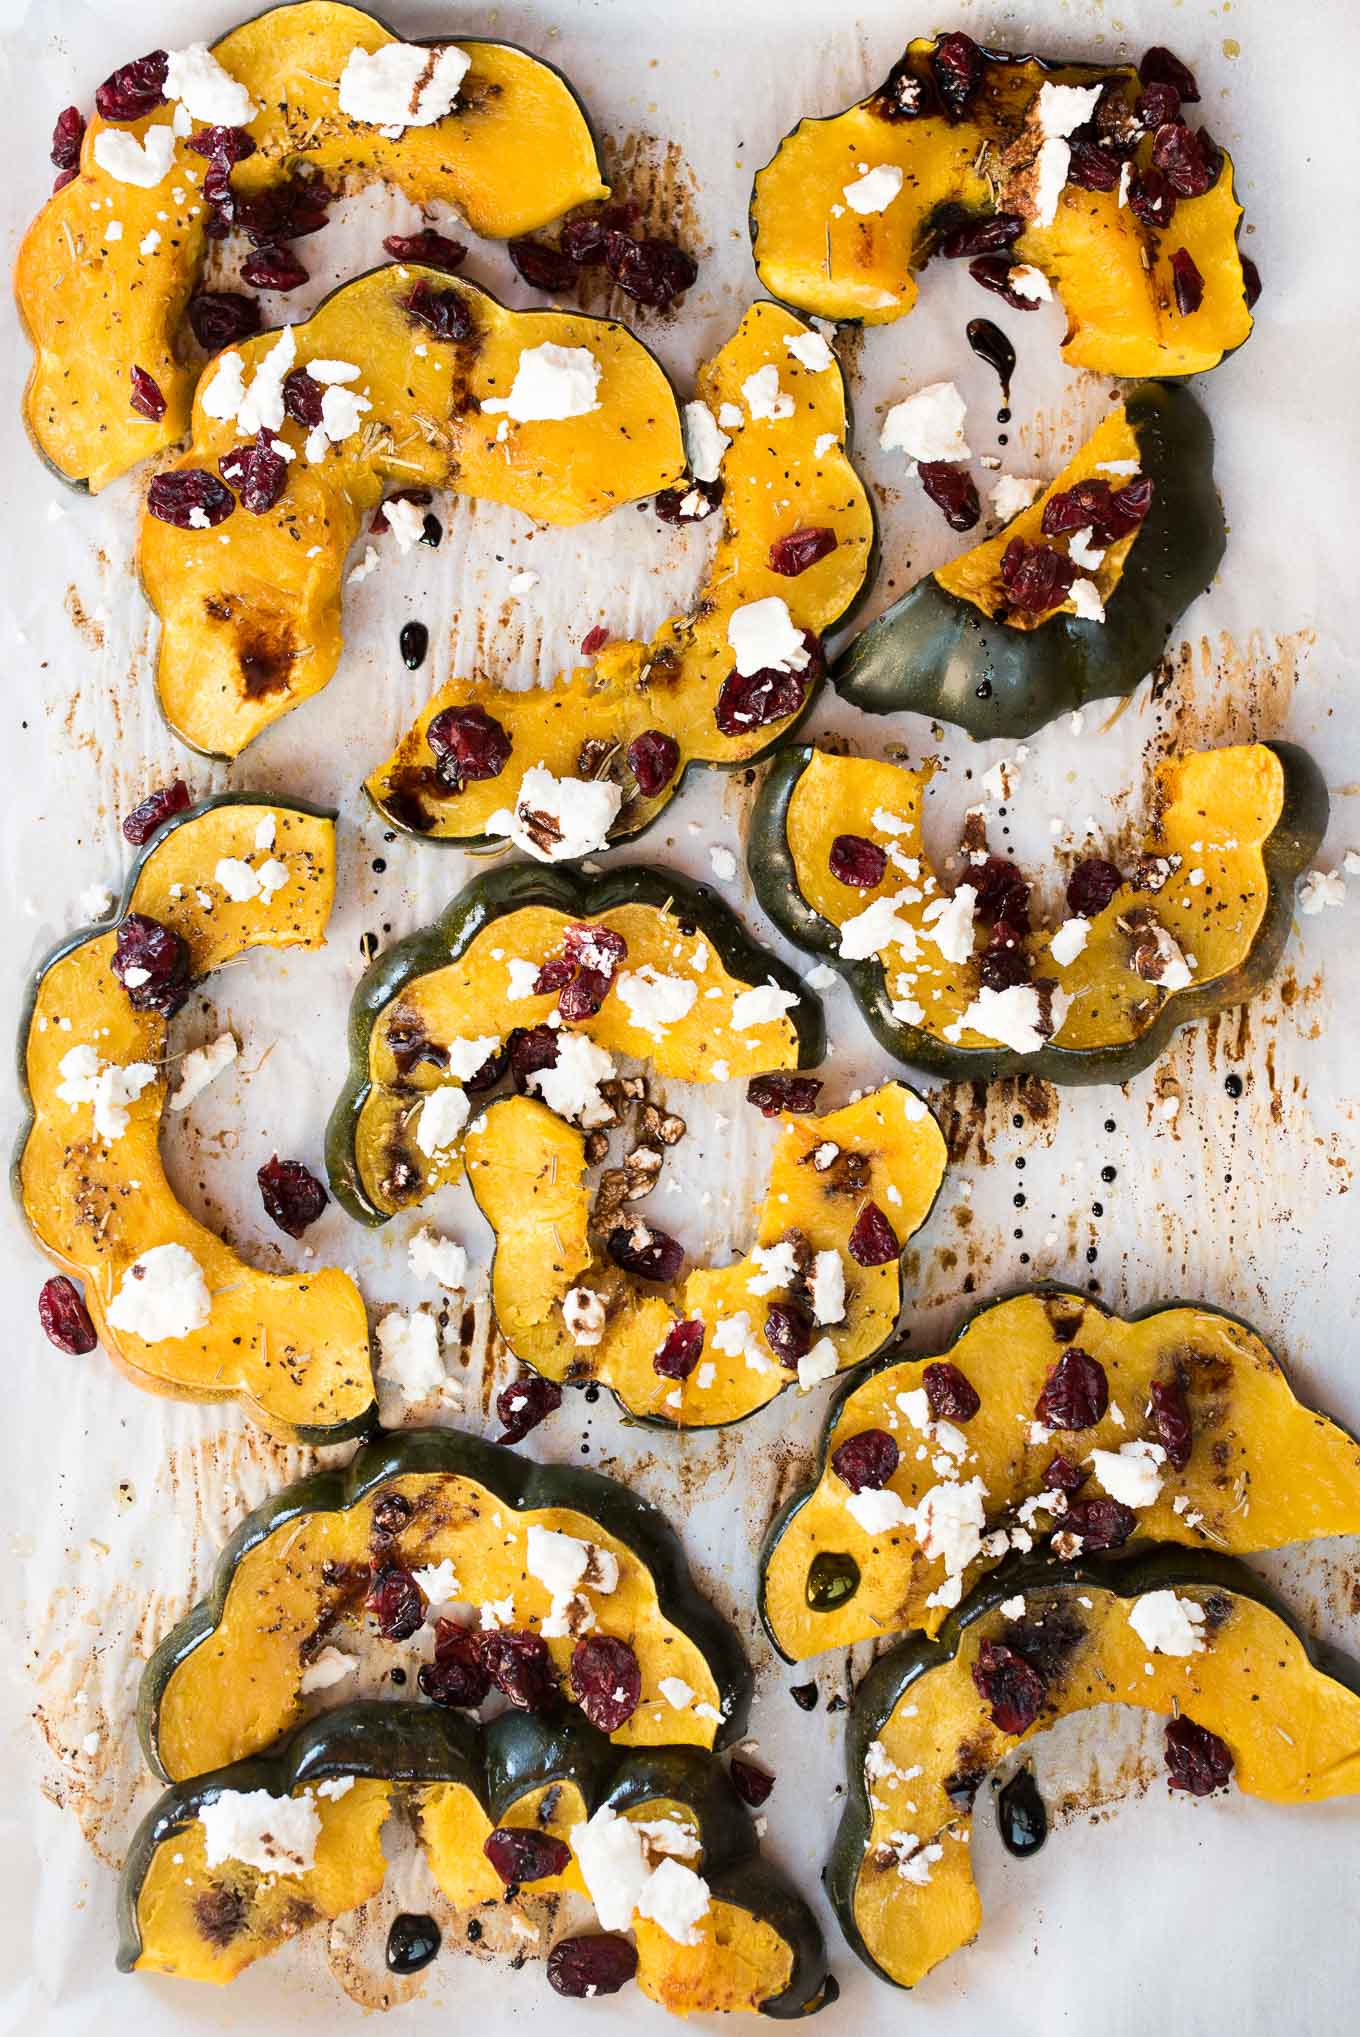 Roasted Acorn Squash with Cranberries, Goat Cheese and Balsamic Glaze ...